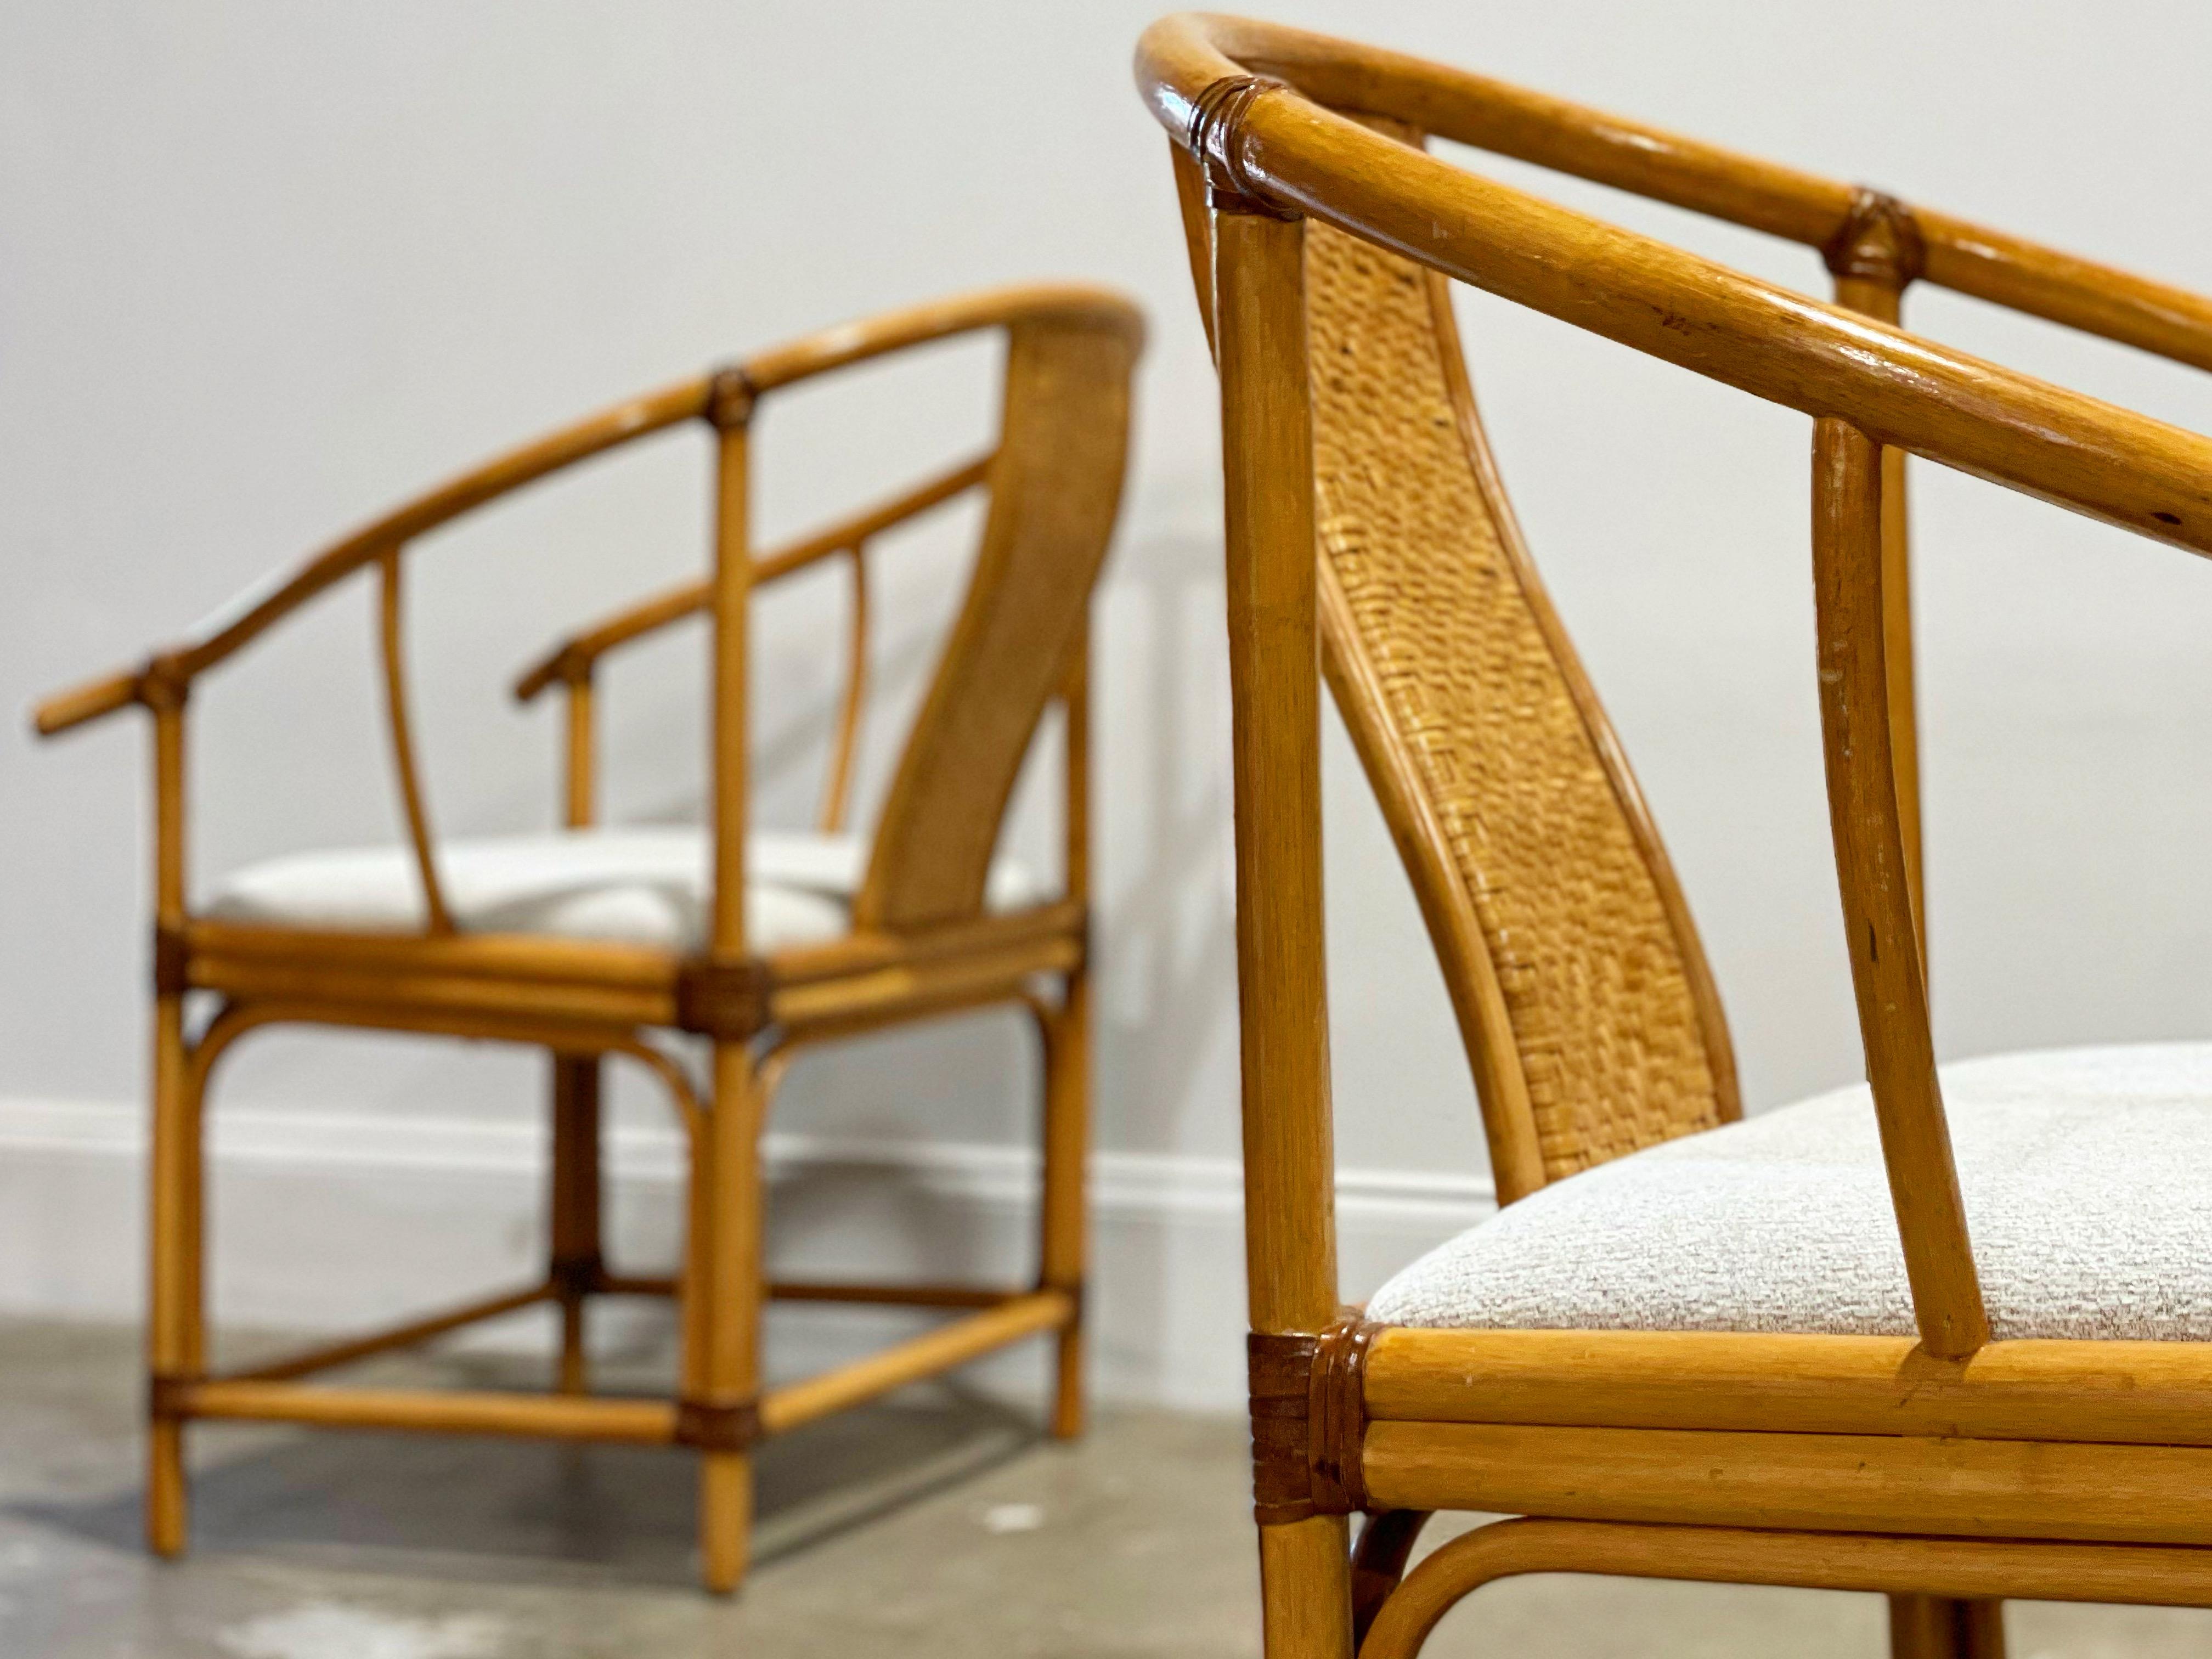 Vintage California organic modern wishbone horseshoe style occasional chairs in rattan, rawhide leather and a chenille boucle. These chairs were produced by American of Martinsville in the late 1970's and retain their original maker tag. Original